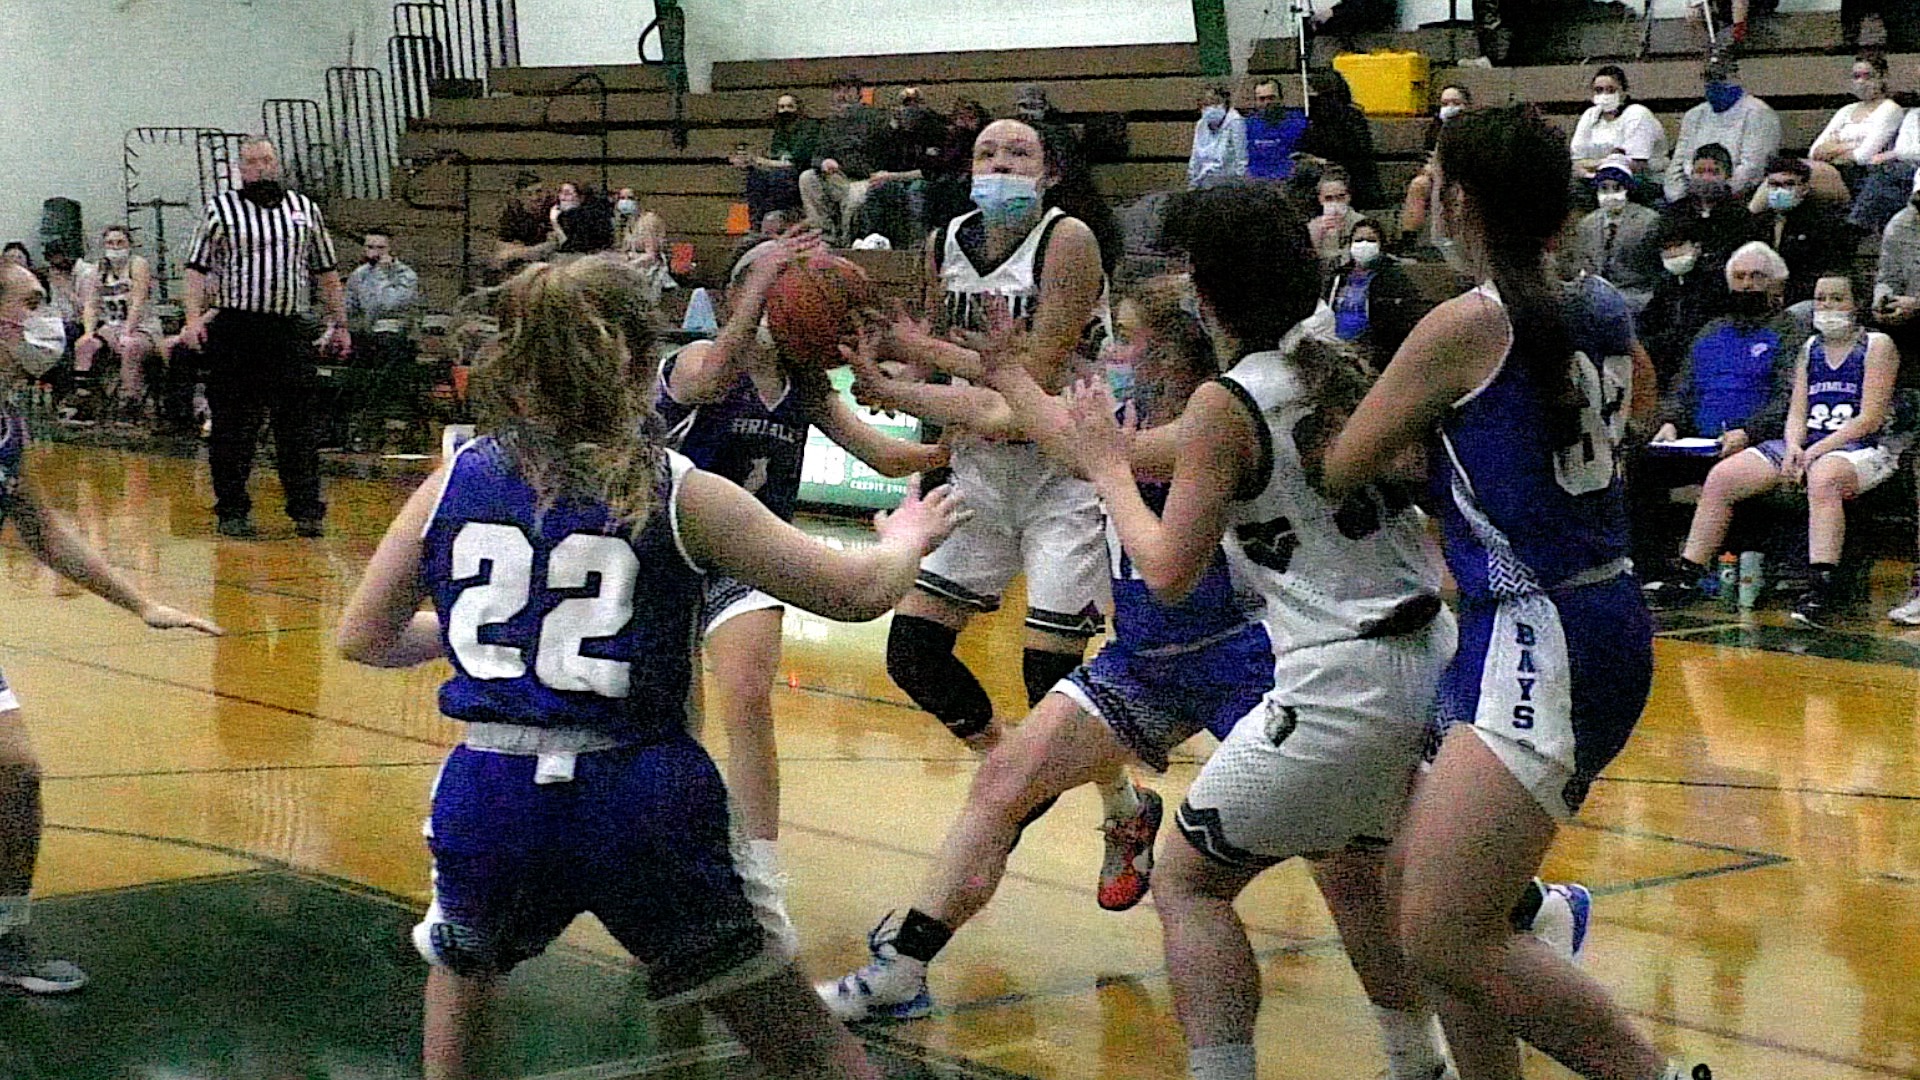 ALINA SHOOK DRIVES INTO A HOST OF BAYS GOING TO THE BASKET IN FIRST QUARTER ACTION AGAINST BRIMLEY THURSDAY EVENING.